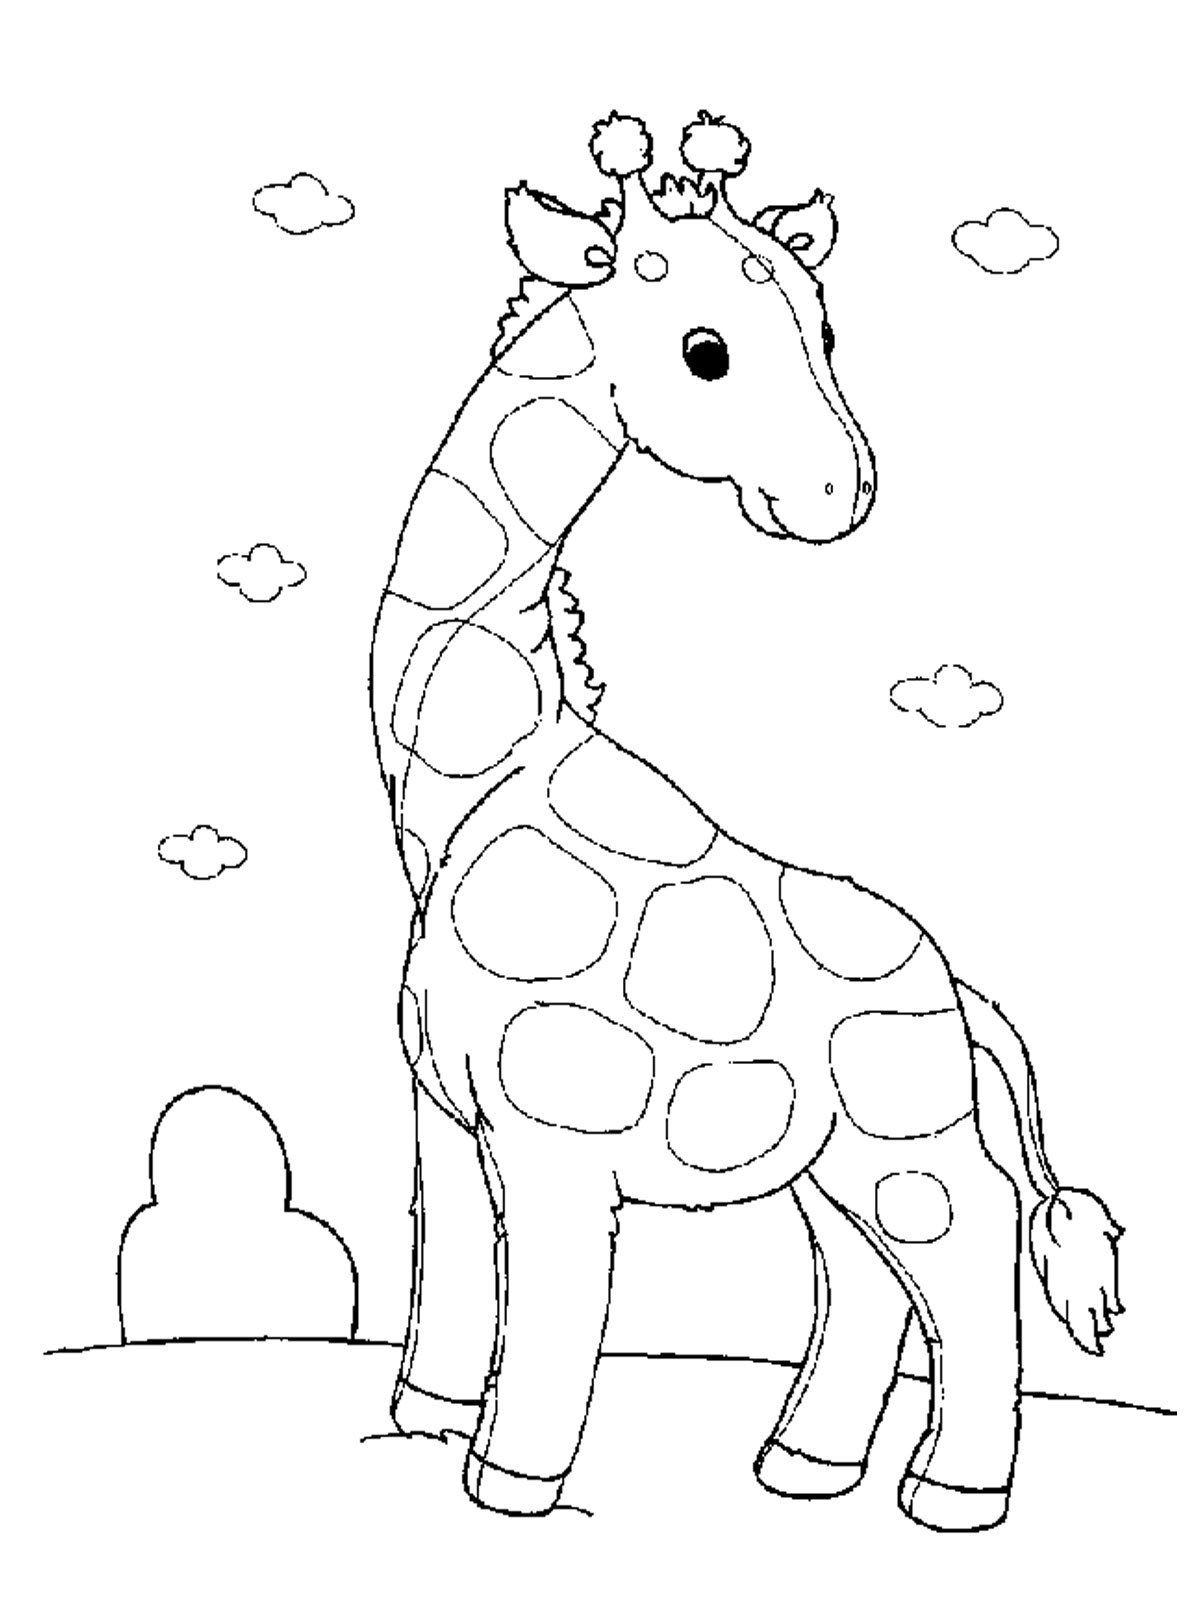 Printable Animal Coloring Pages For Kids
 Animal Coloring Pages 7